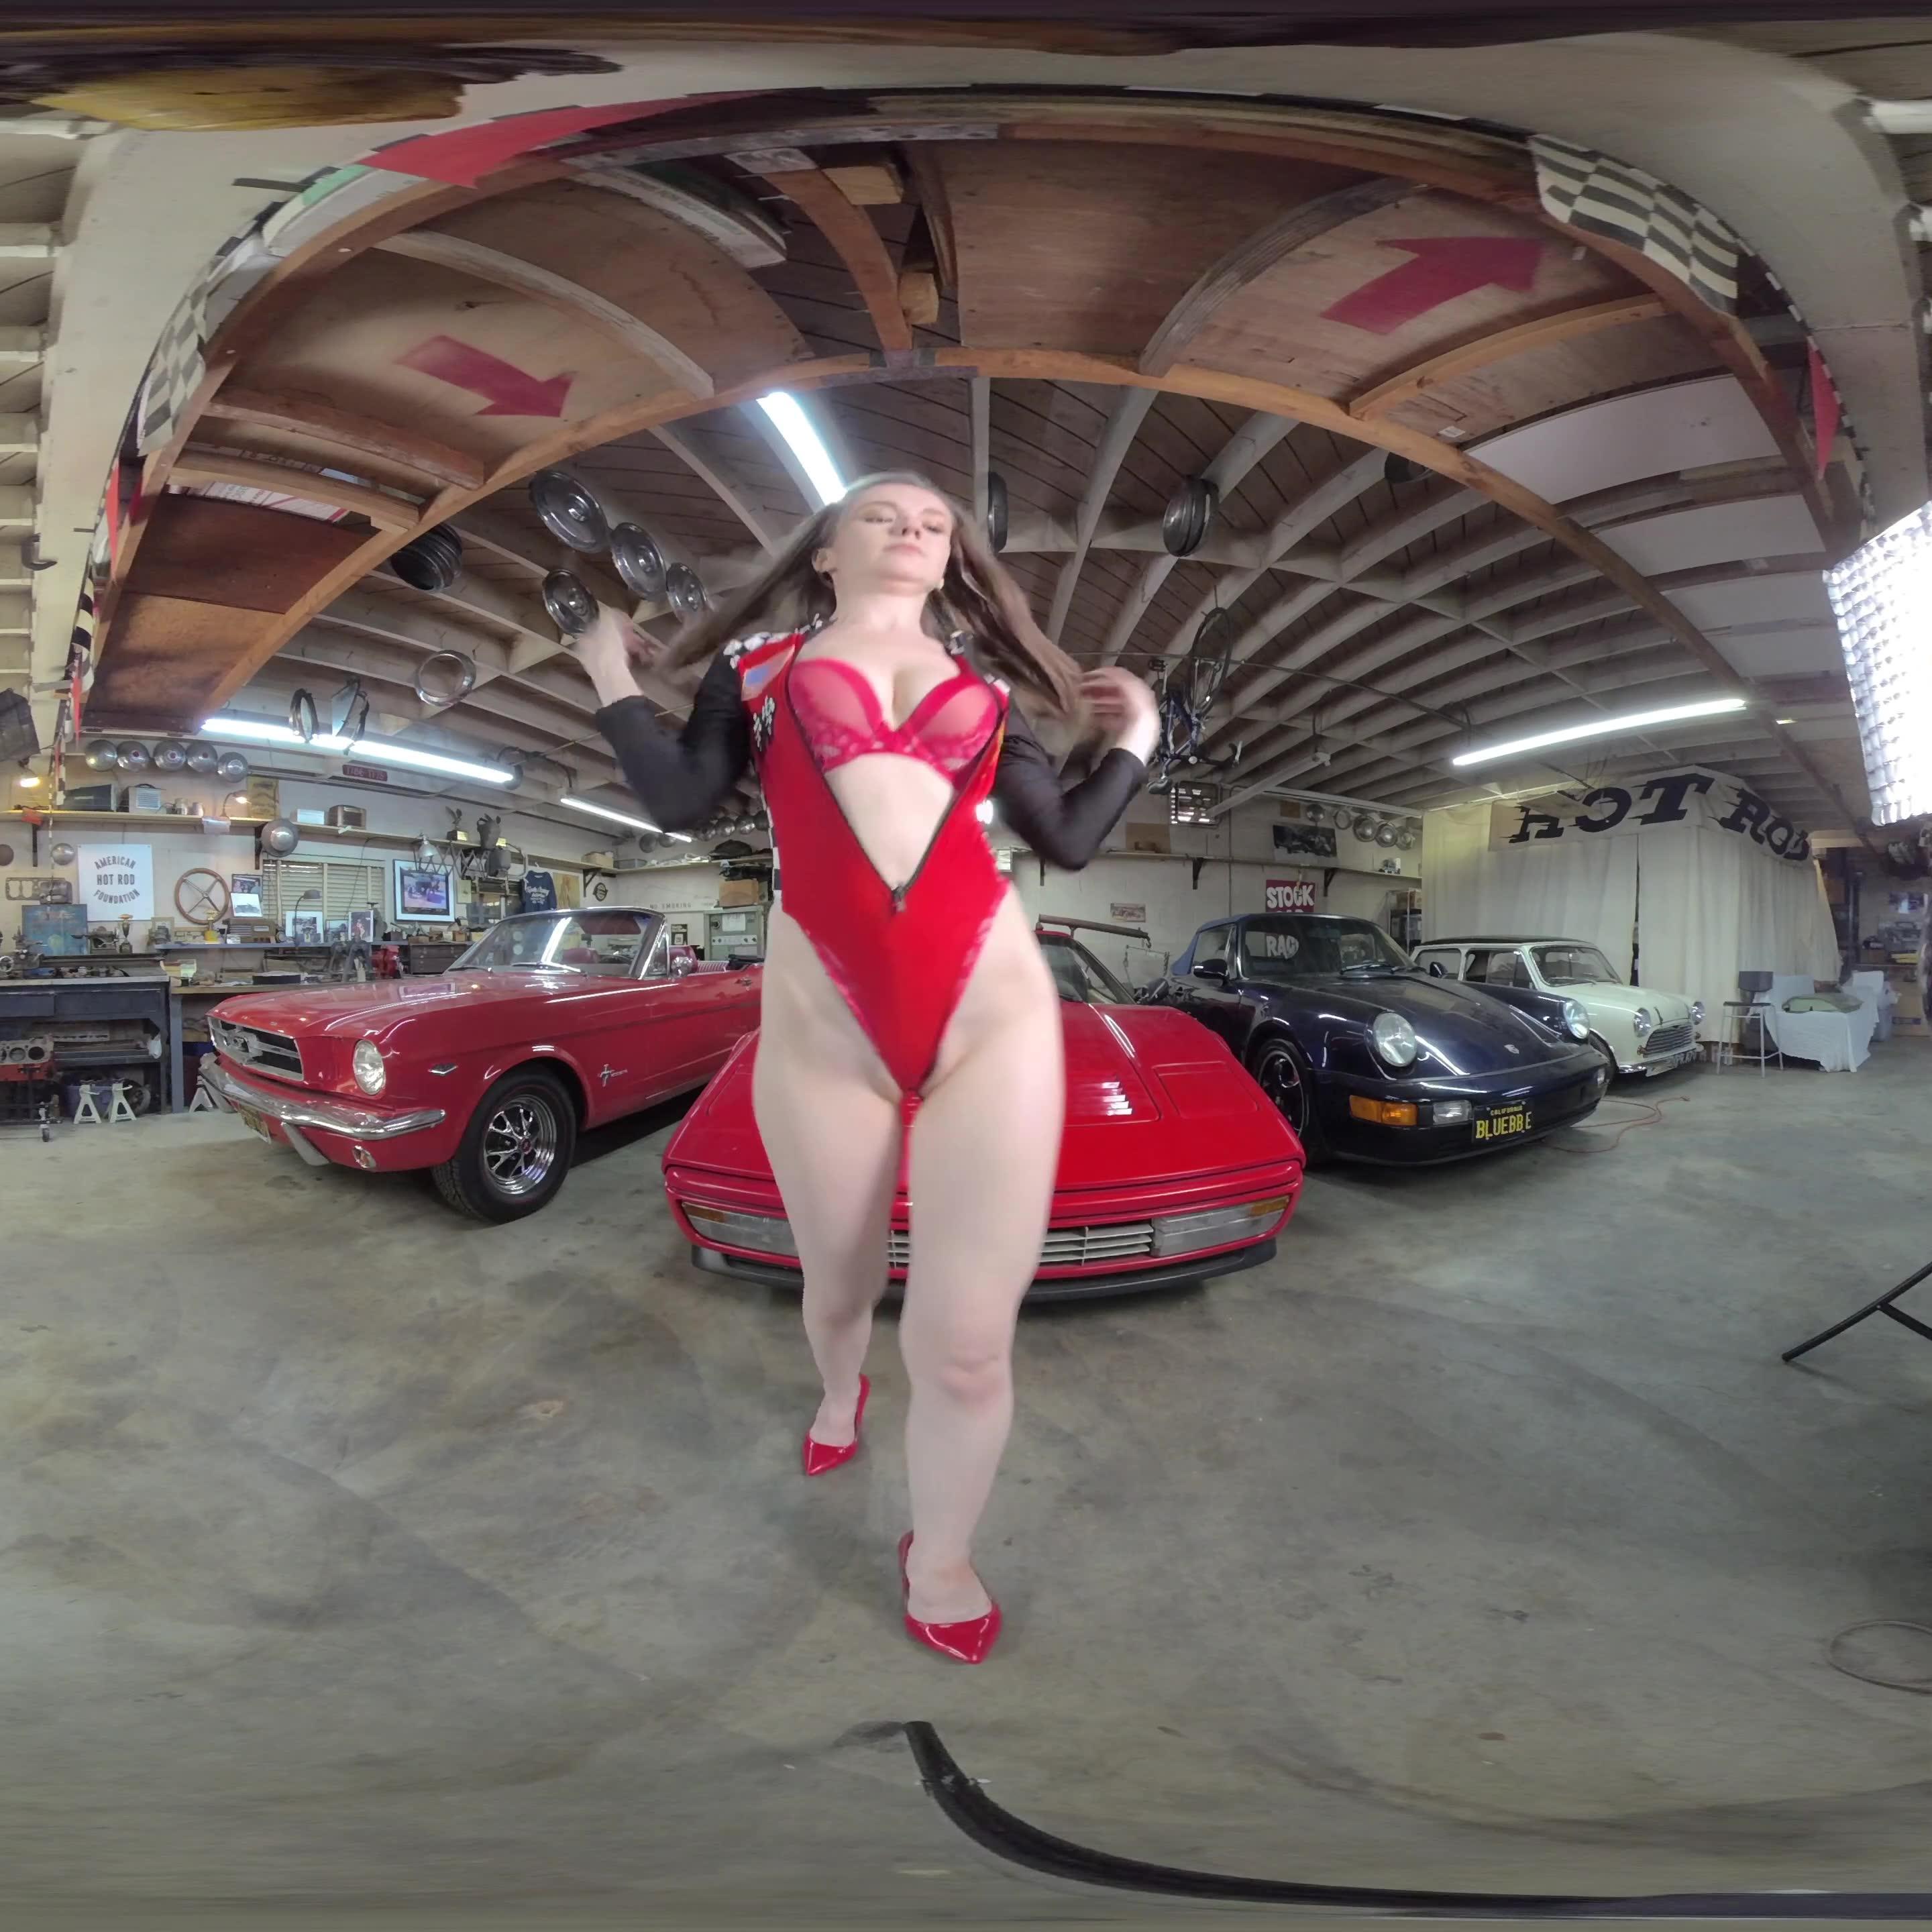 Ferrari and a hottie who is in her birthday suit